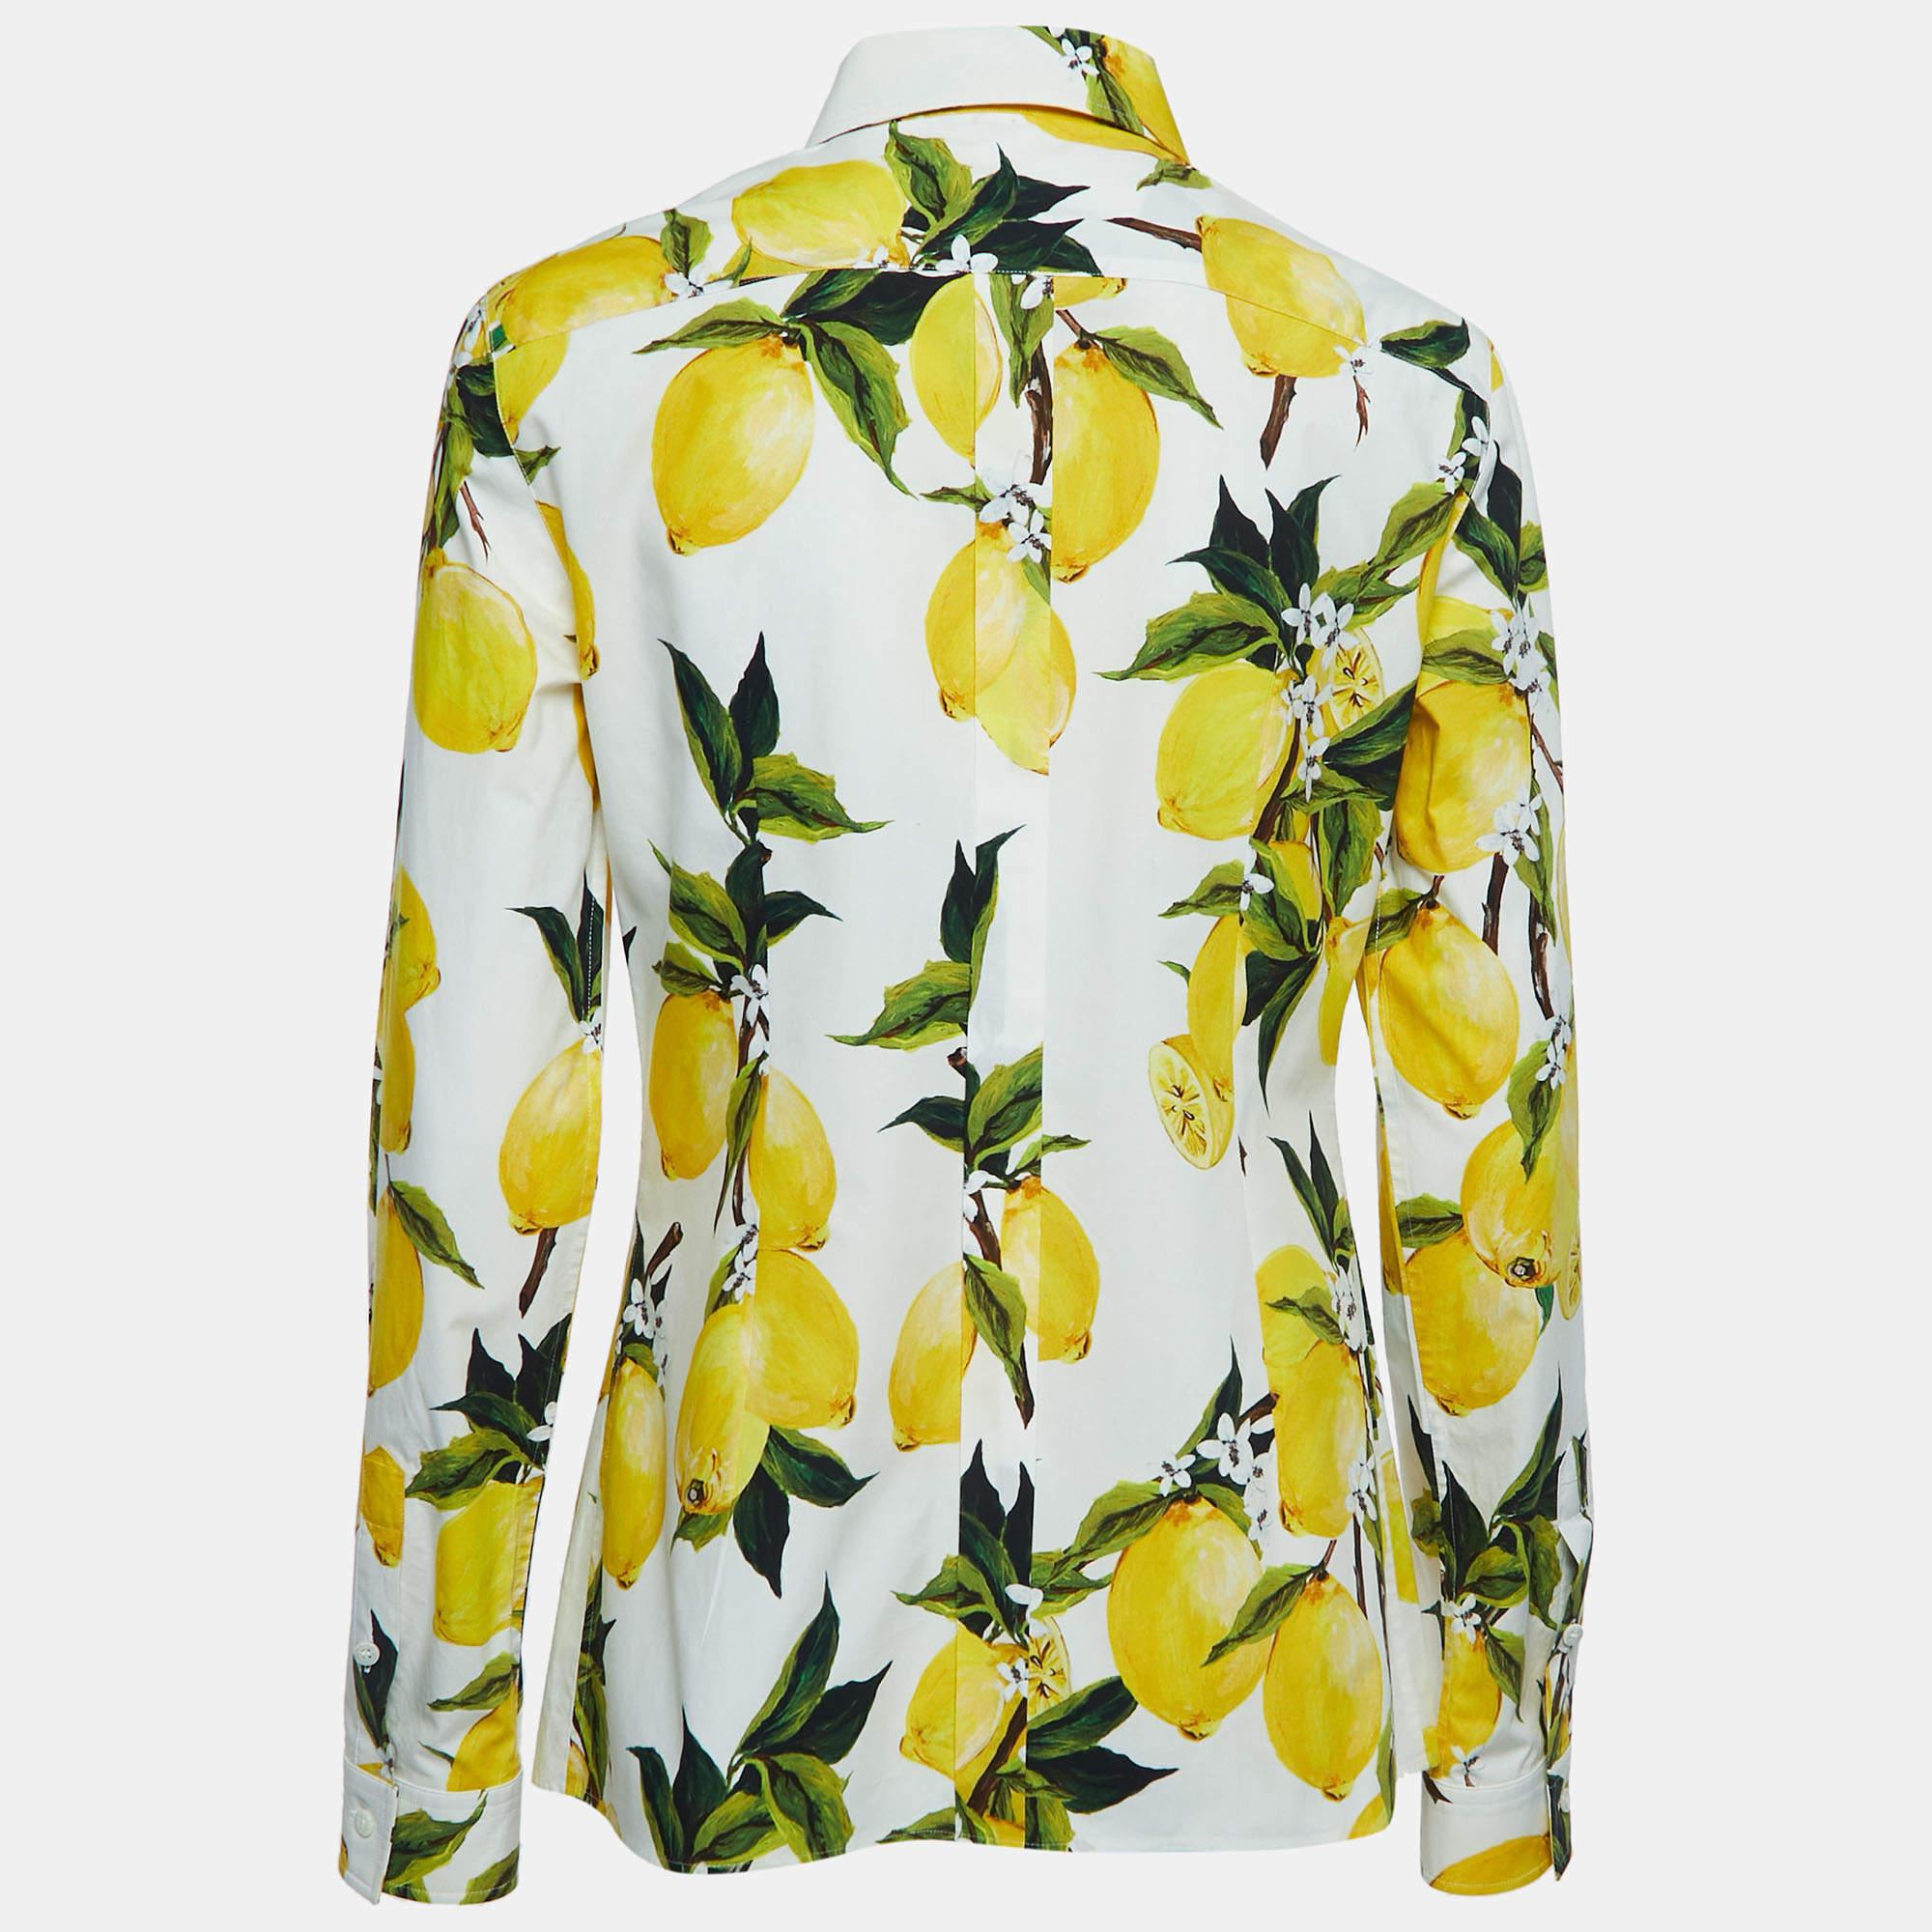 Shirts are an indispensable part of a wardrobe, so this brand brings you a creation that is both versatile and stylish. It has been tailored from quality material with striking white lemon print. The shirt is detailed with signature elements and a